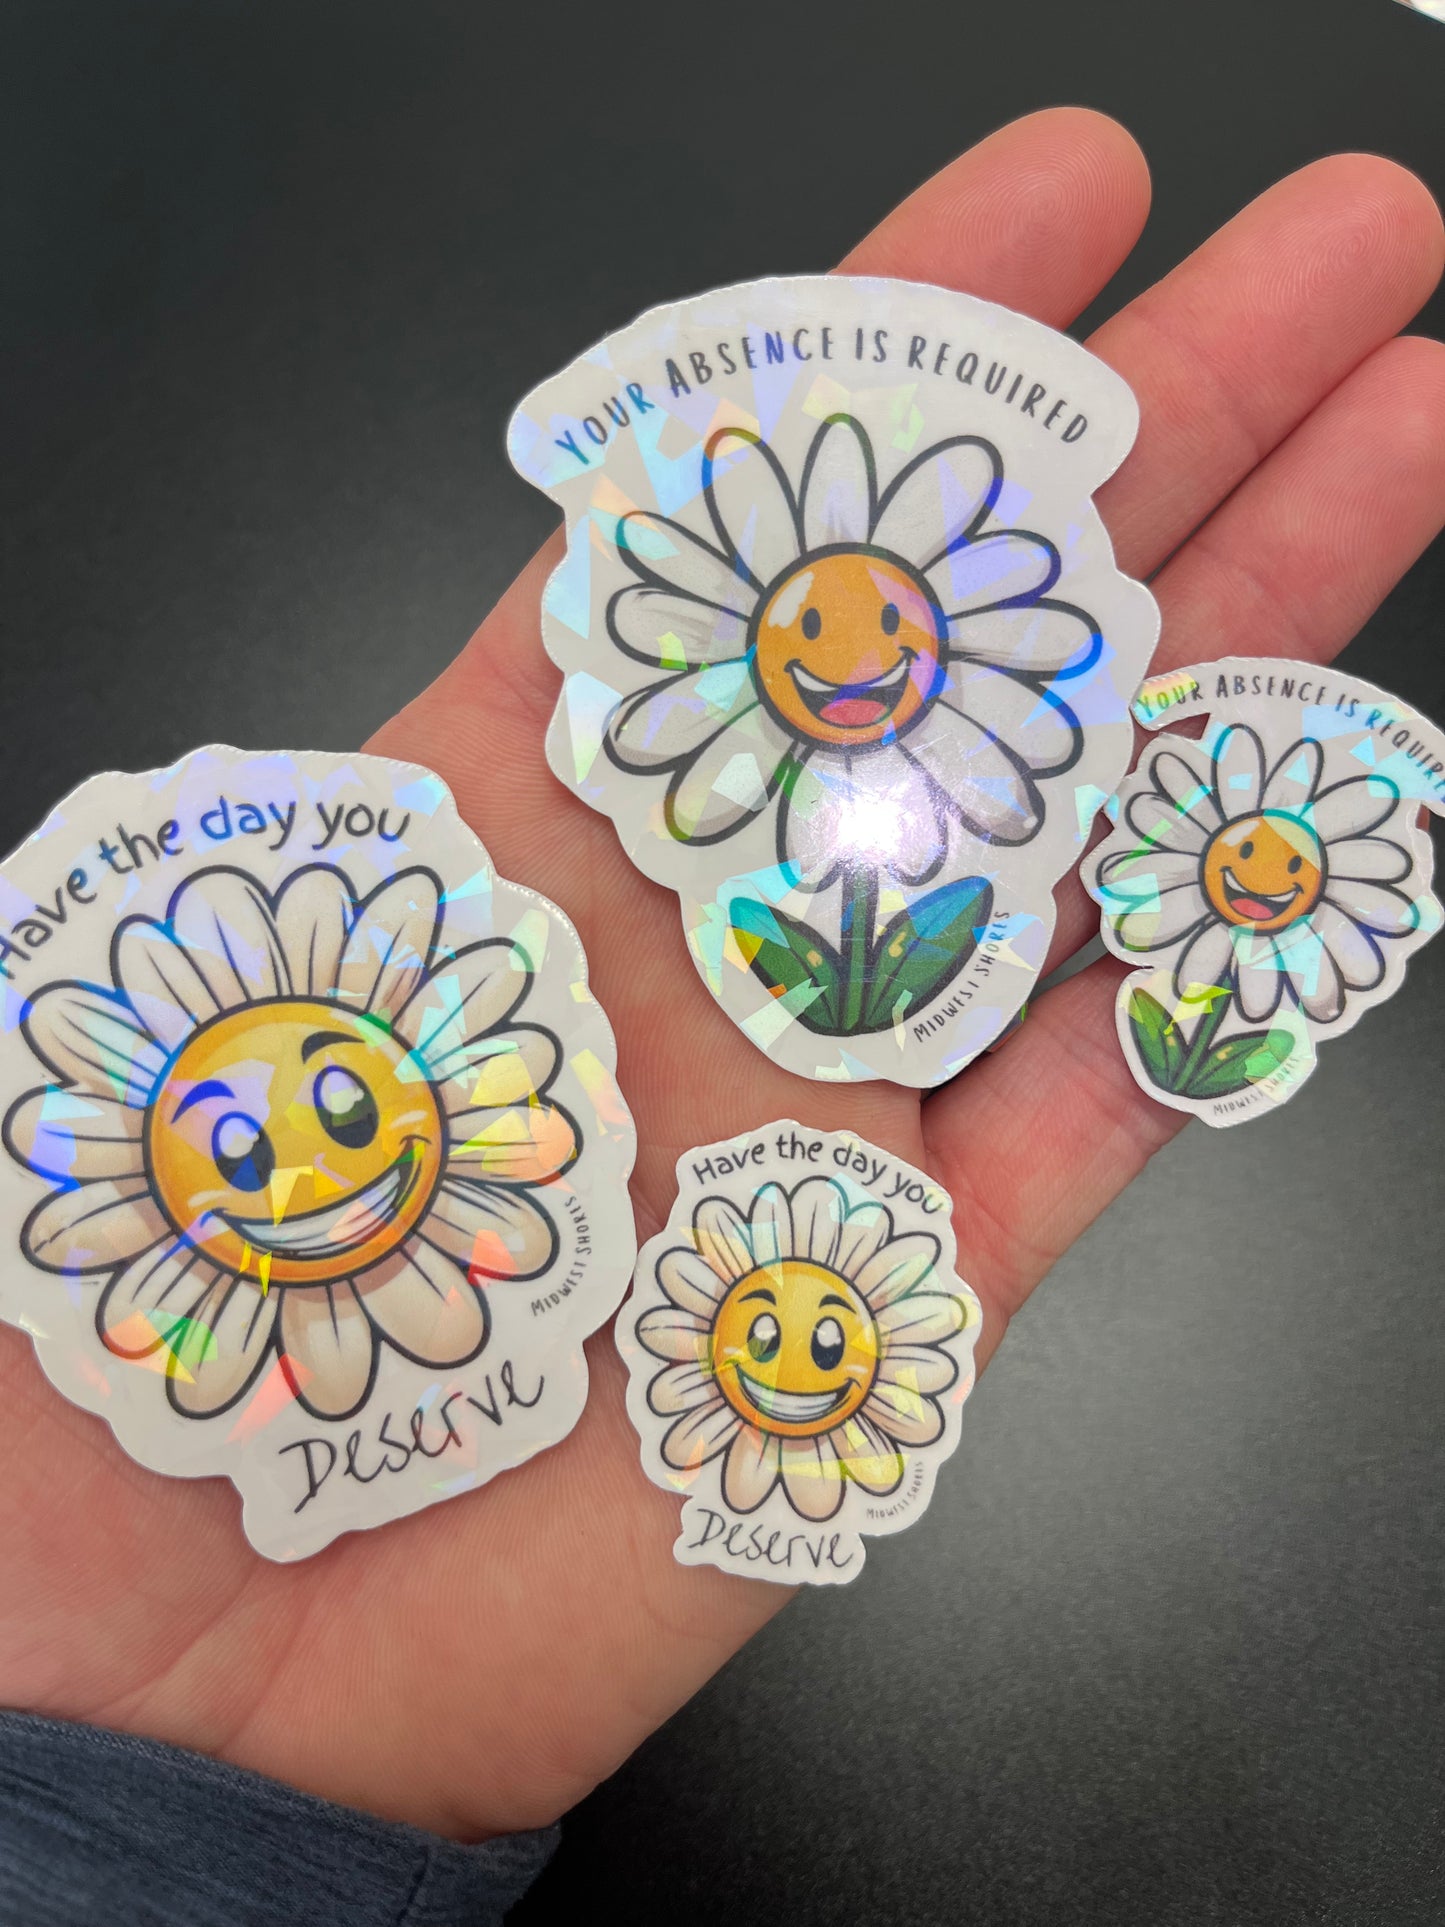 Have the day you deserve daisy sticker and your absence is required daisy sticker 